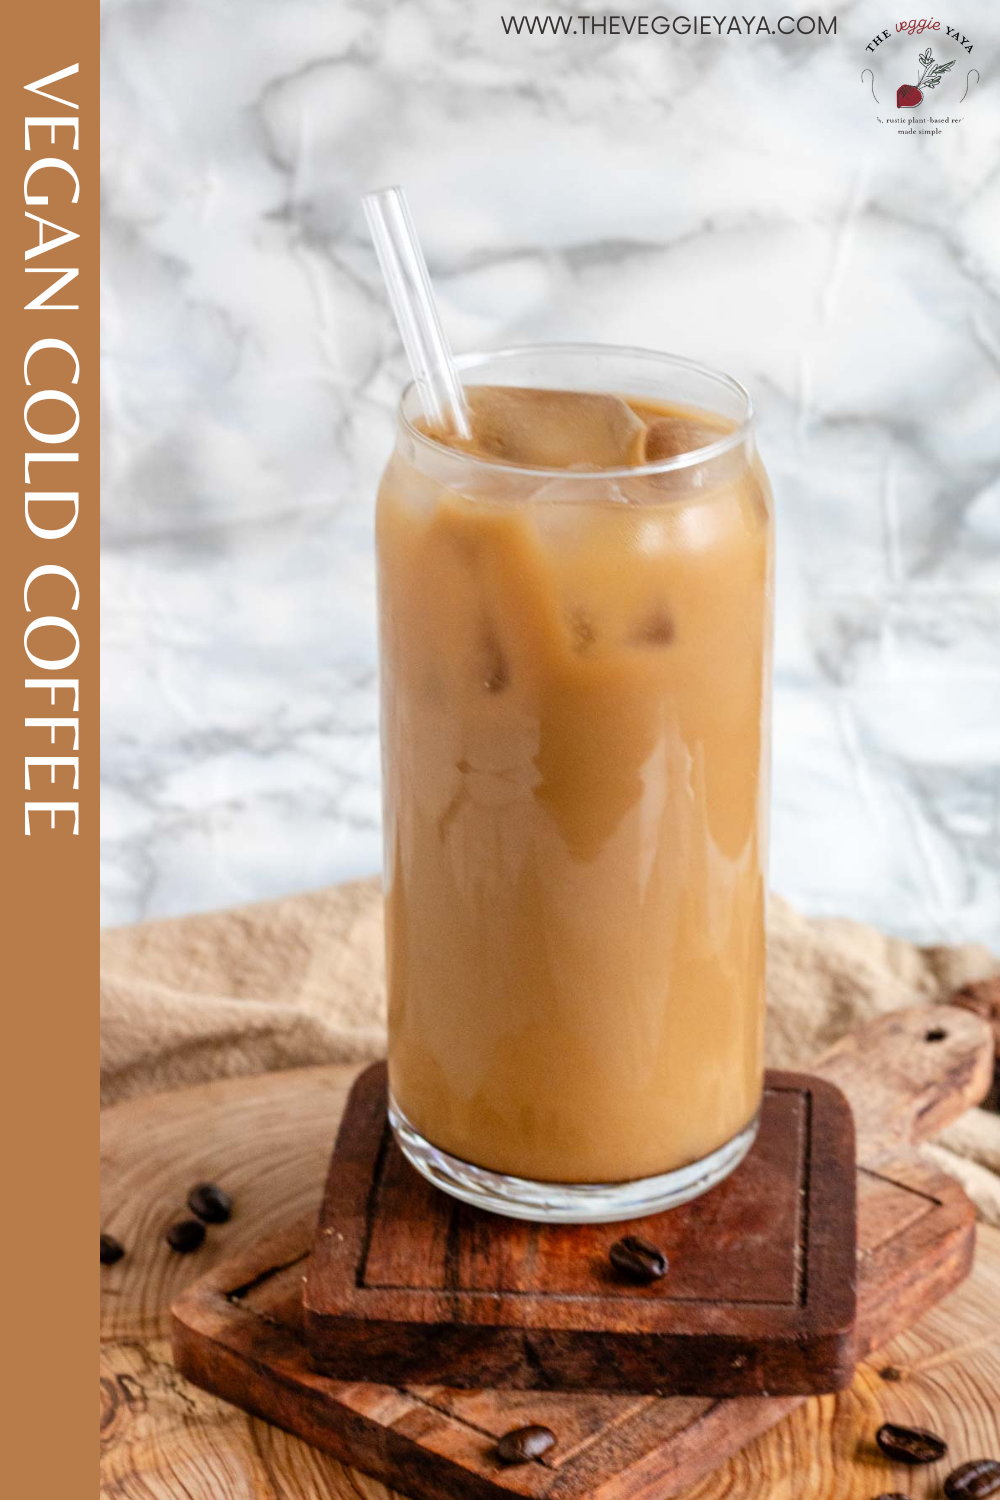 Vegan cold coffee pin with brown side bar.